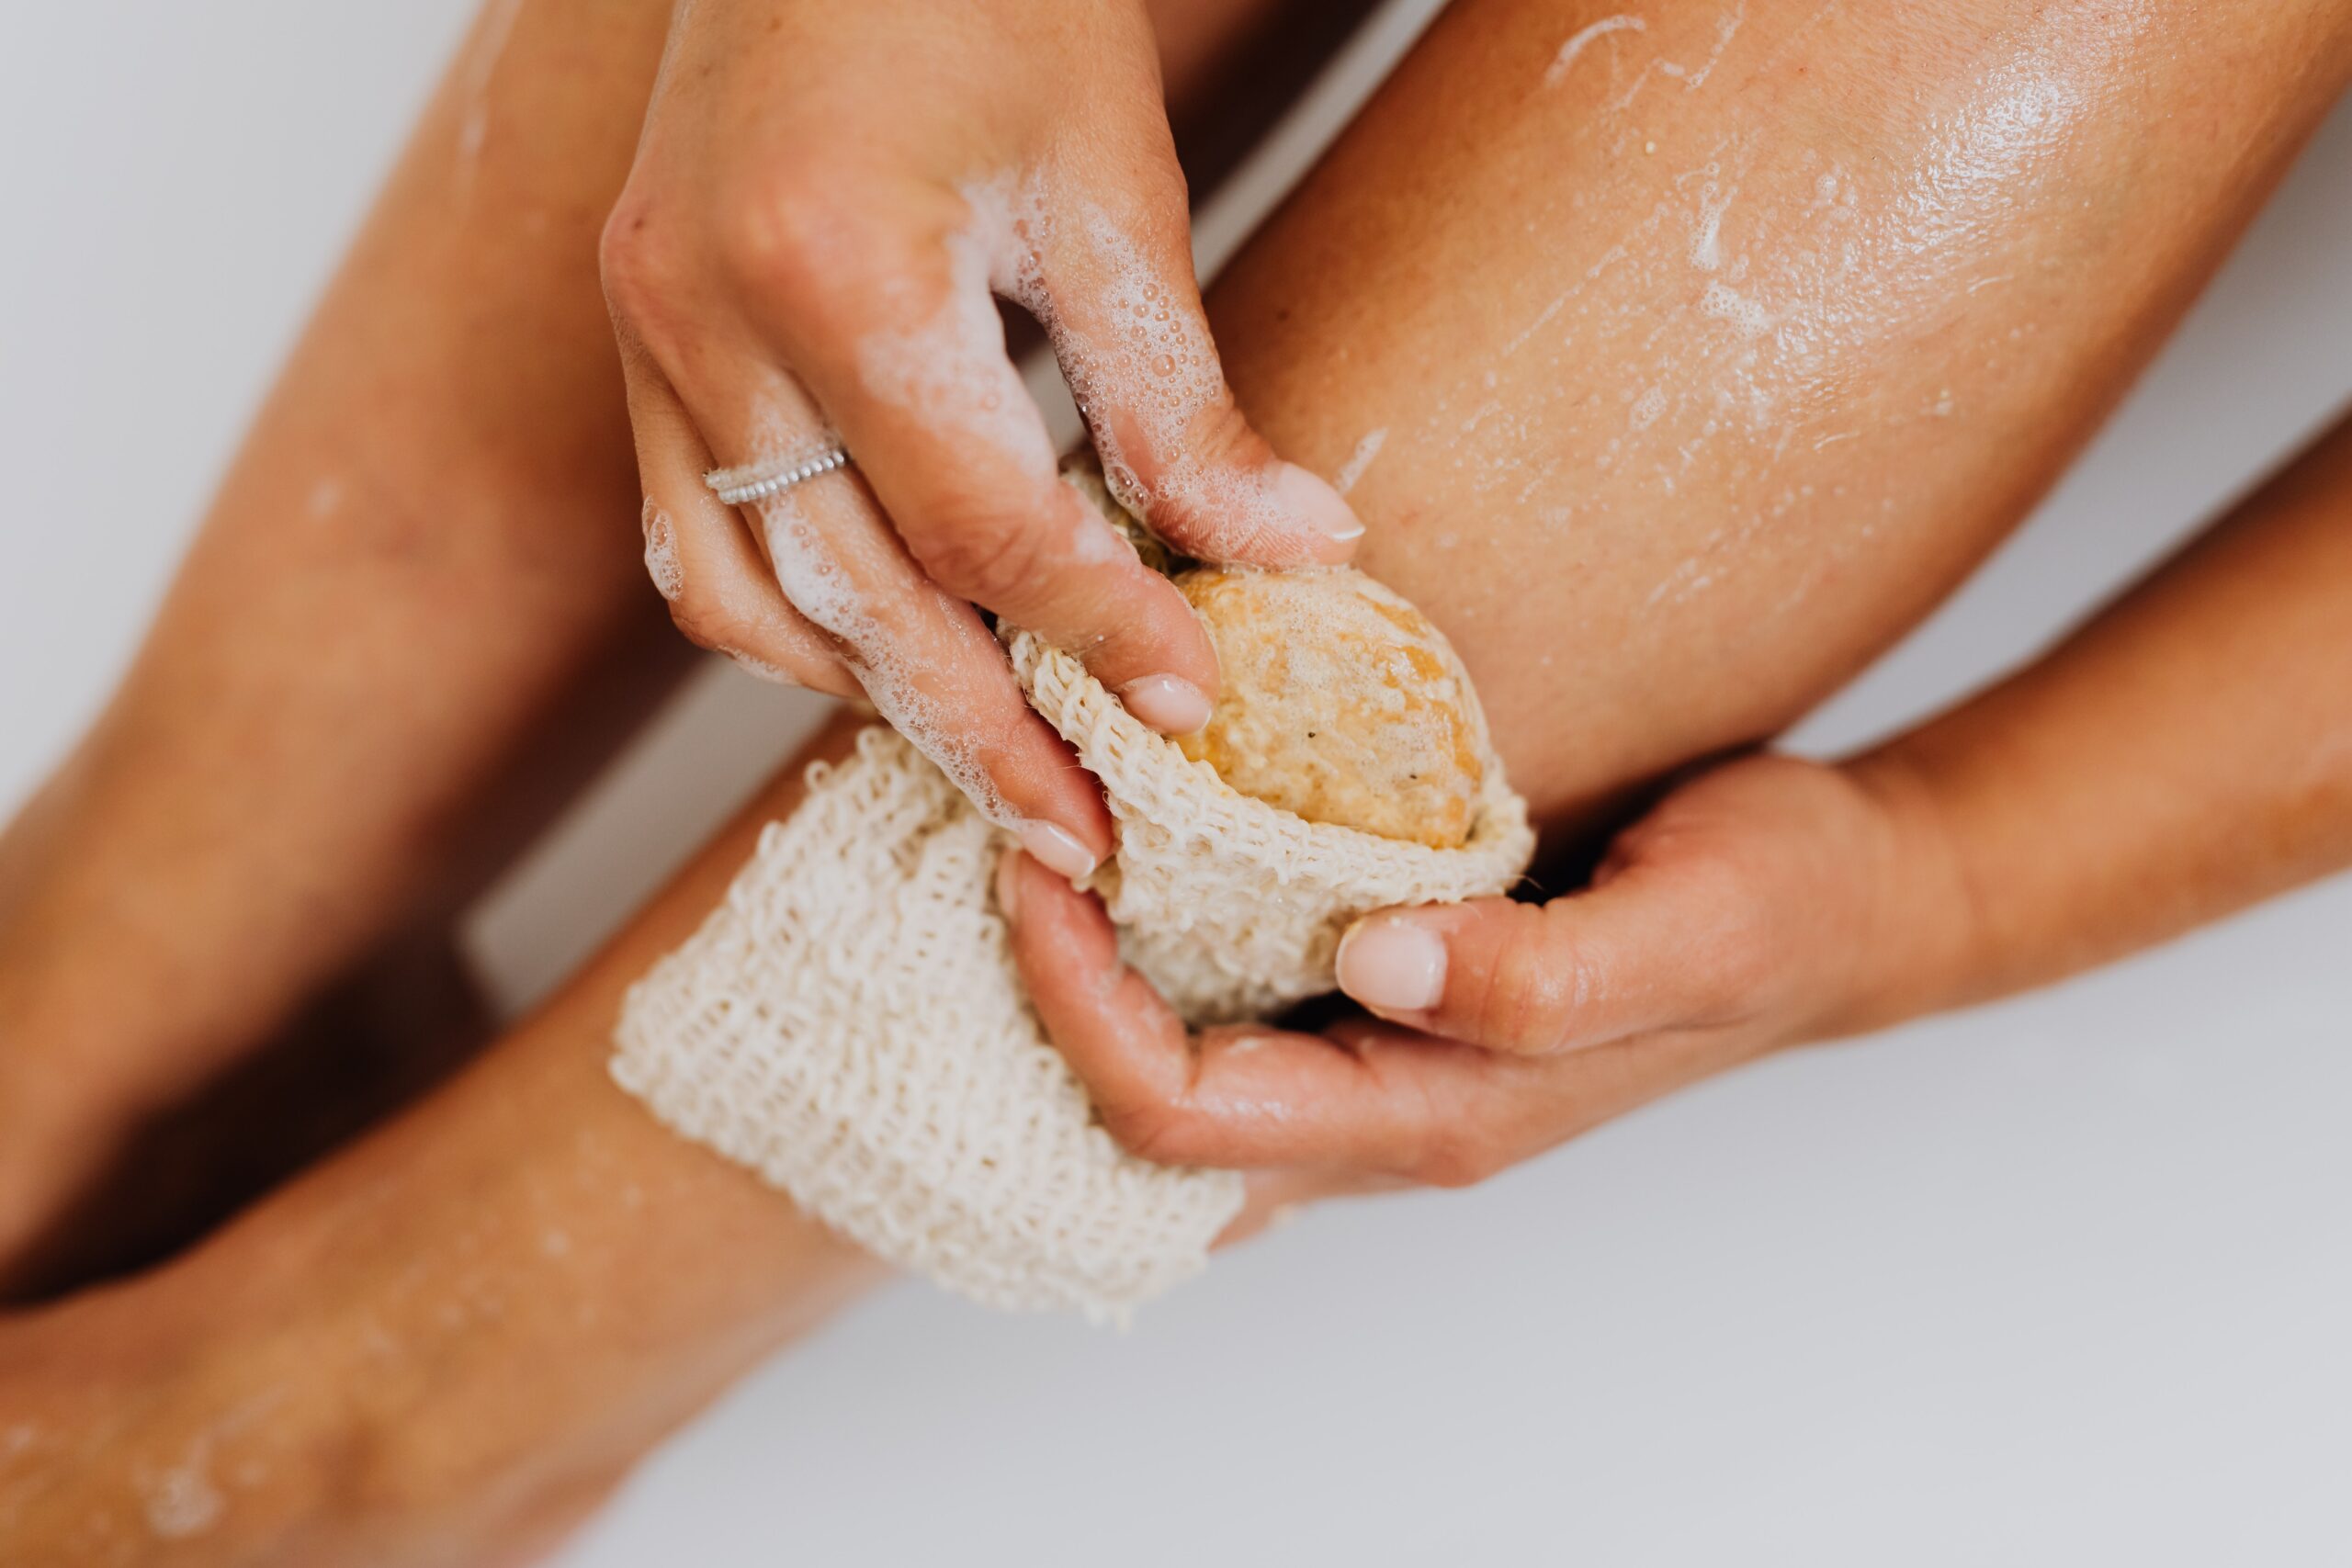 a person using a body scrub with soap on her leg